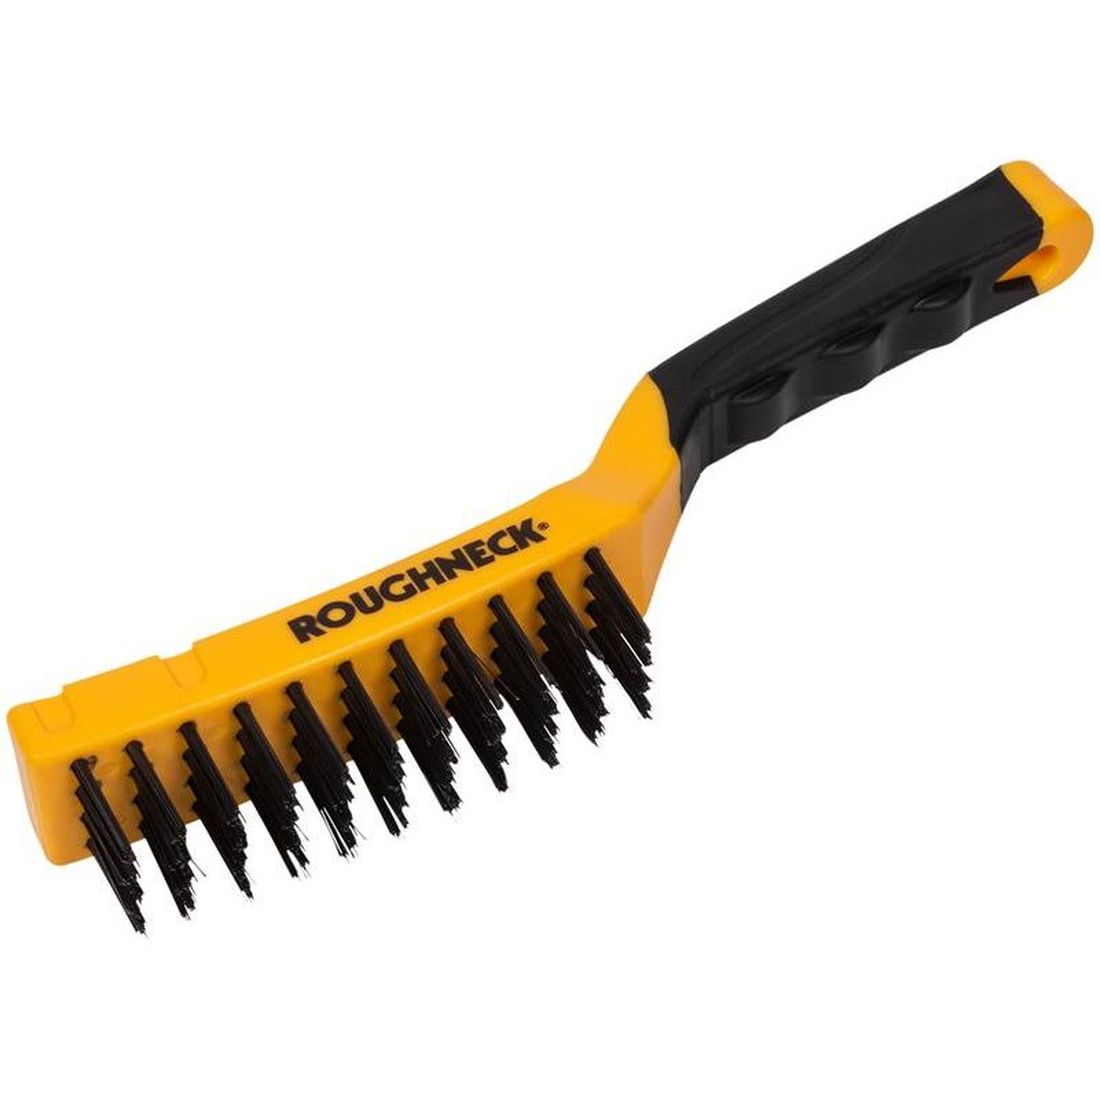 Roughneck Carbon Steel Wire Brush Soft Grip 300mm (12in) - 4 Row                          